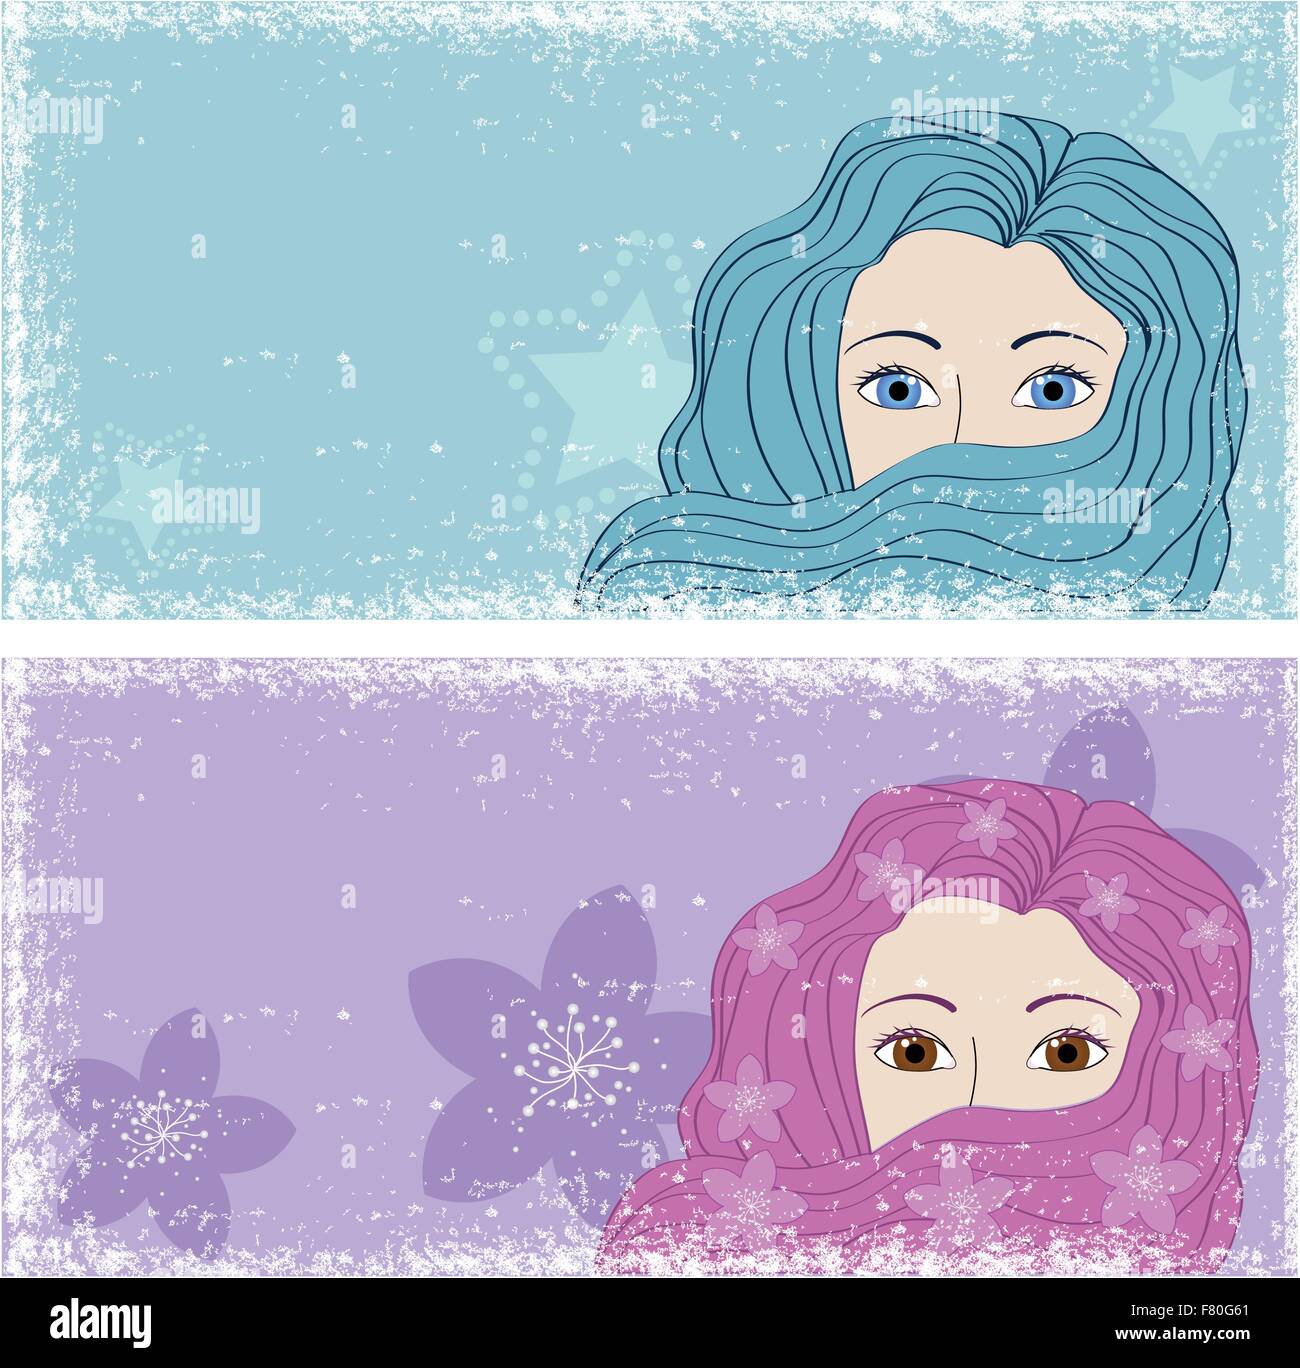 grunge banners with girls Stock Vector